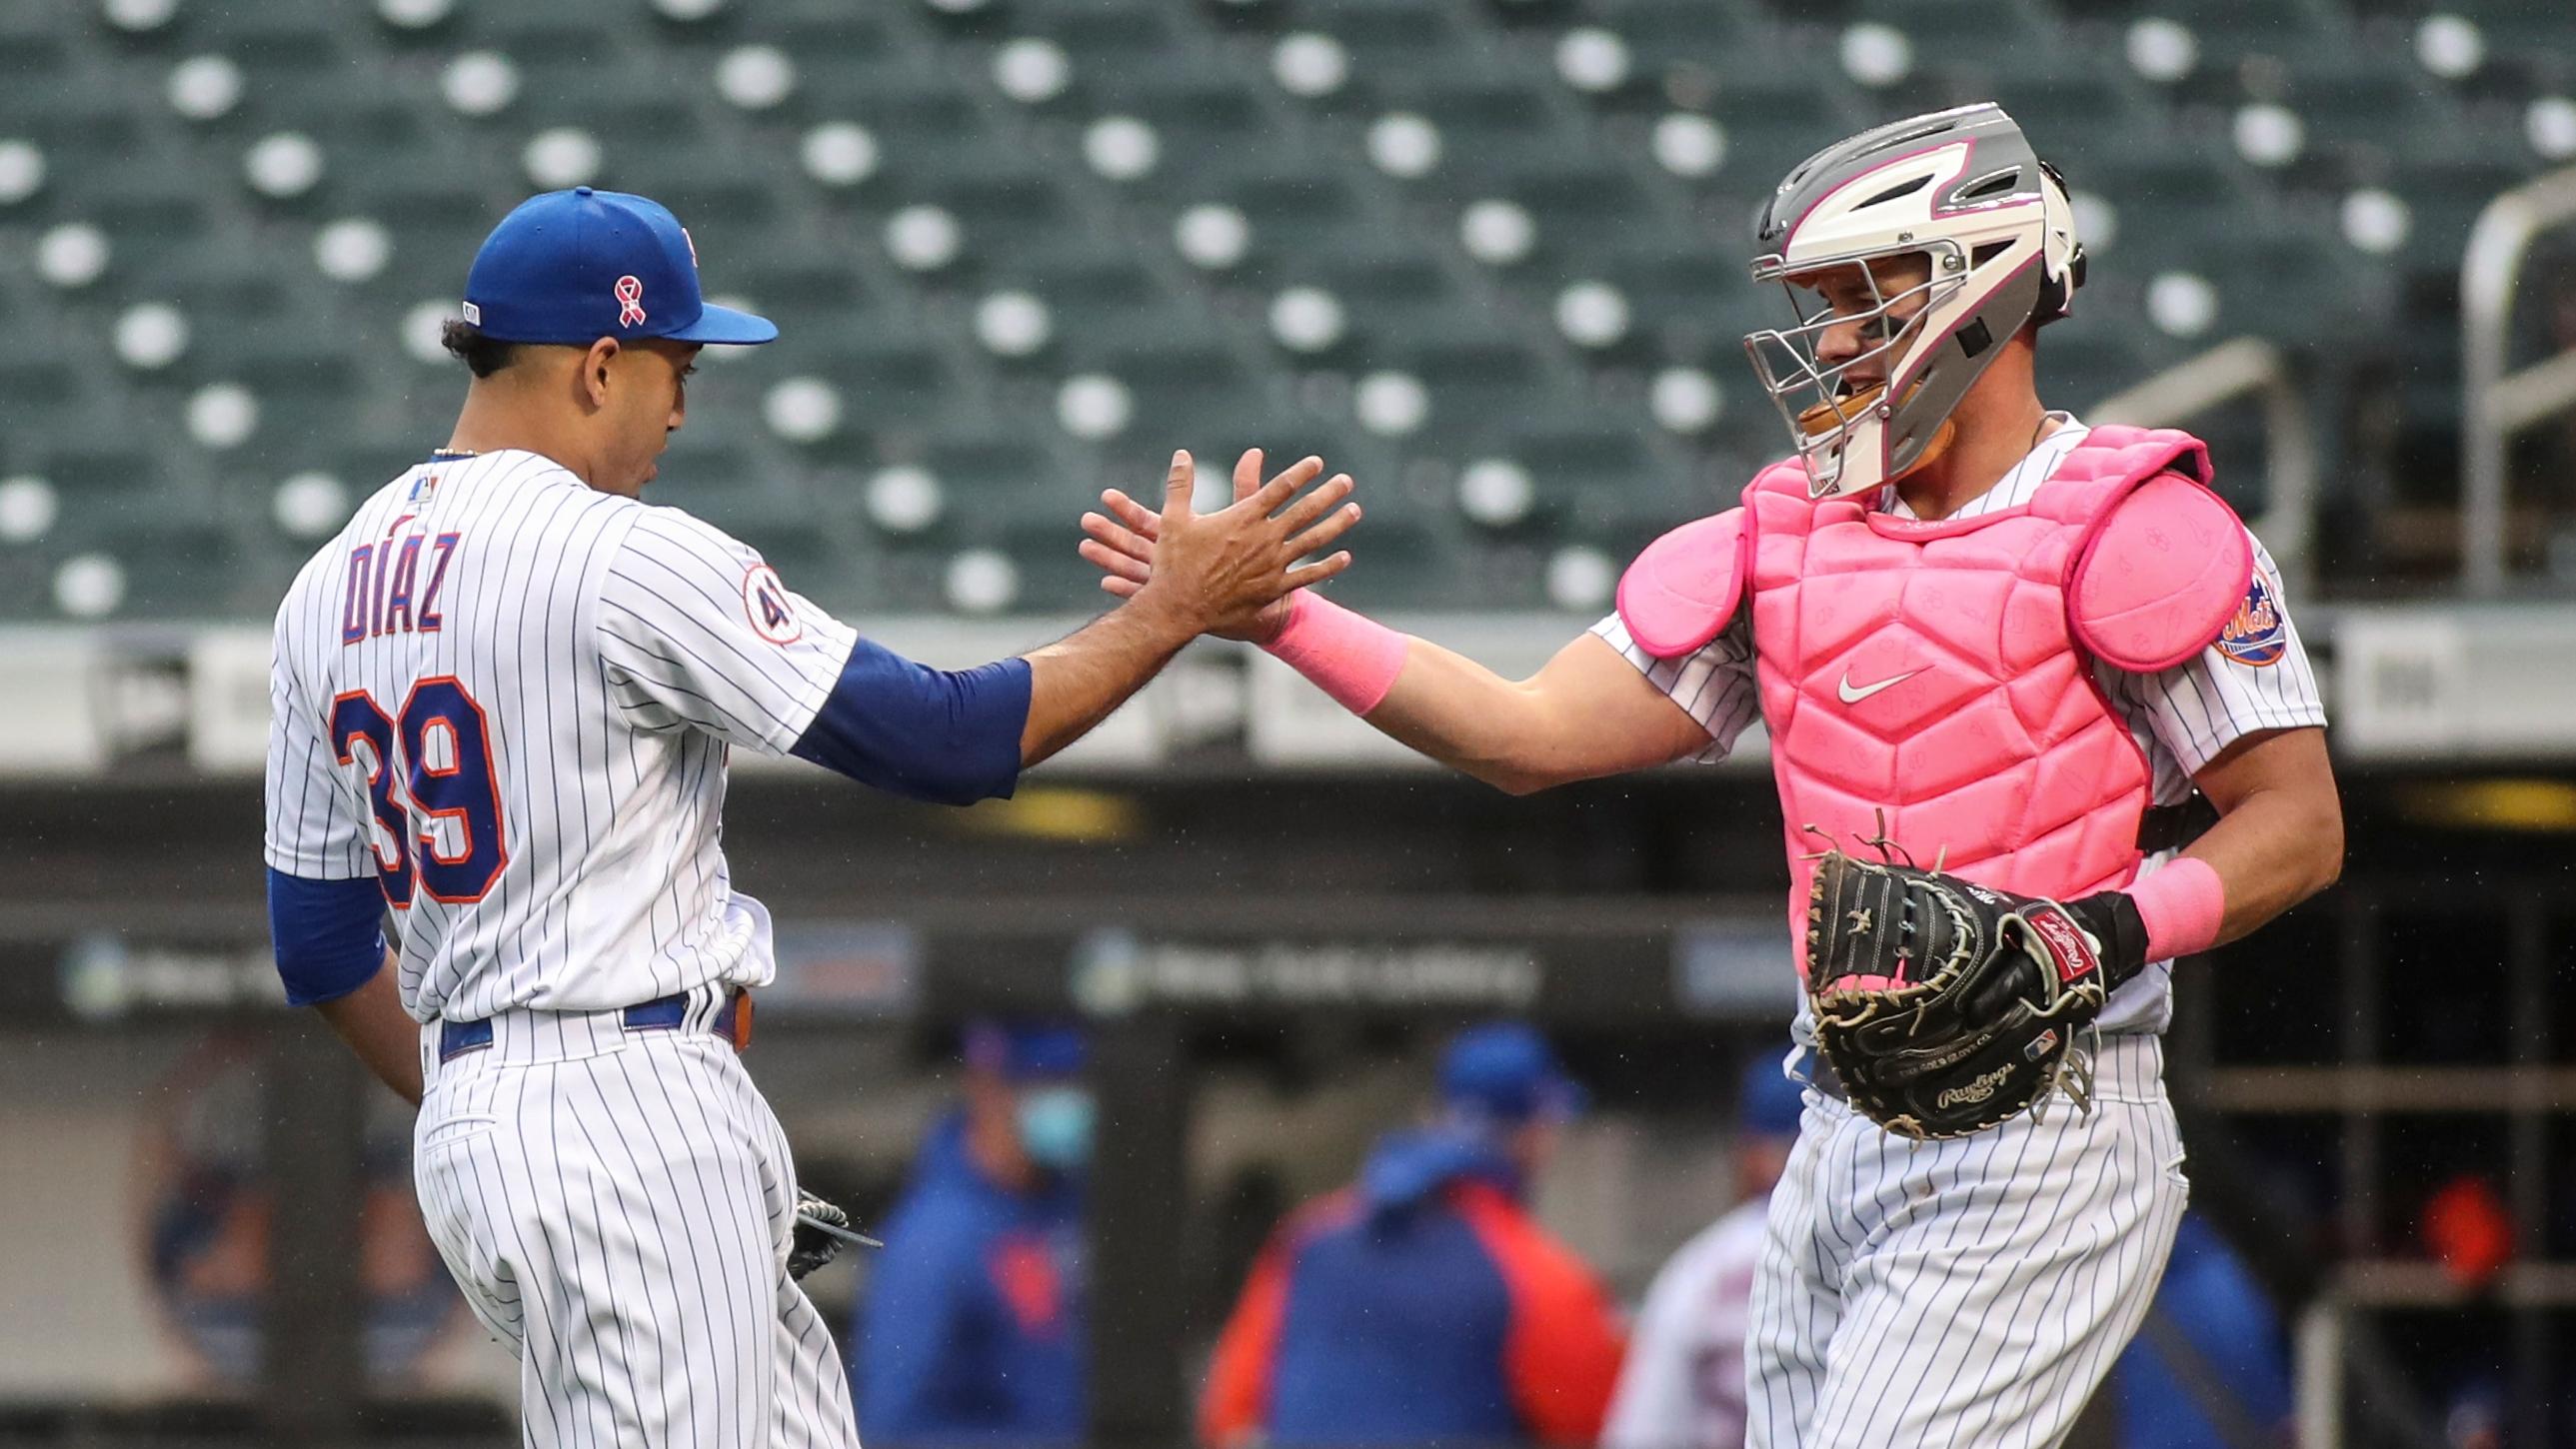 New York Mets pitcher Edwin Diaz celebrates with catcher James McCann (33) after recording a save in a 4-2 victory over the Arizona Diamondbacks at Citi Field. / Wendell Cruz-USA TODAY Sports